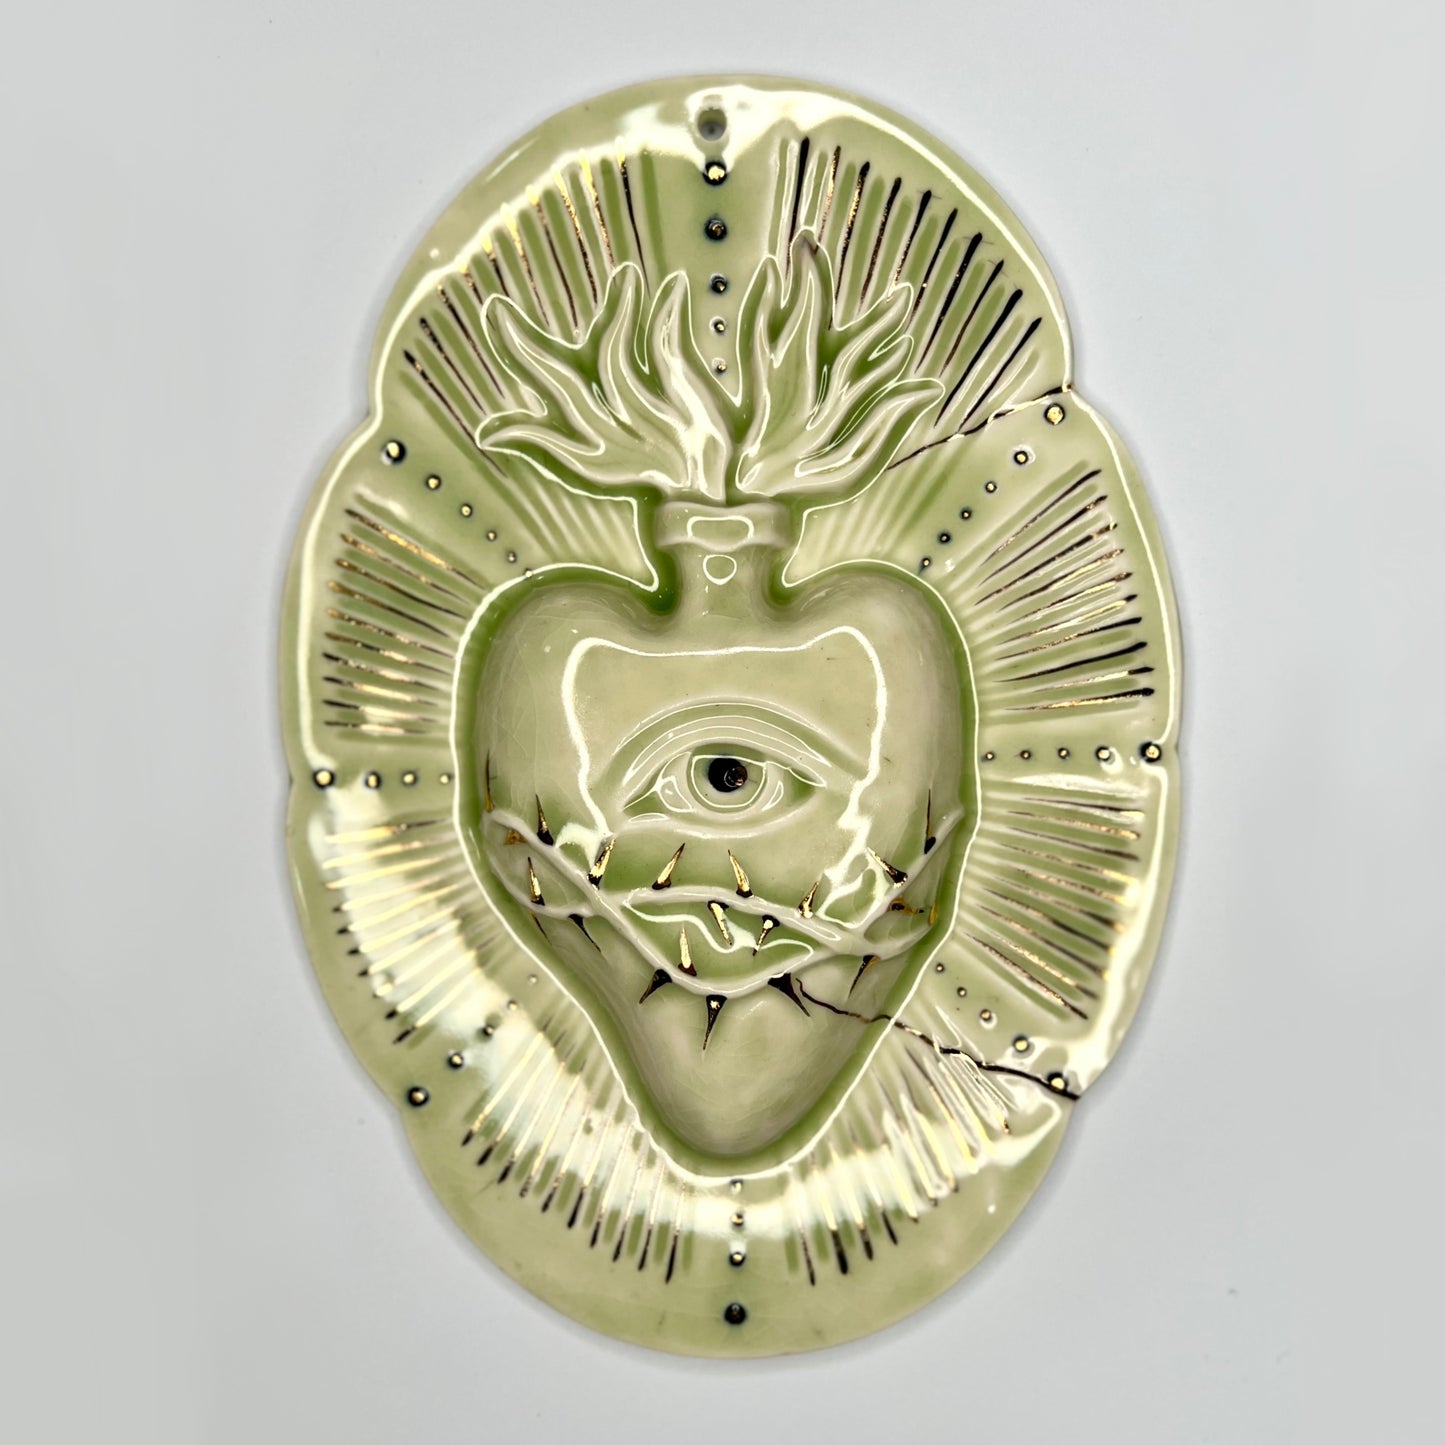 Product Image: Large Sacred Eye 2 - Hand crafted Porcelain Home Ornament. Sacred Heart with Eye & Thorns